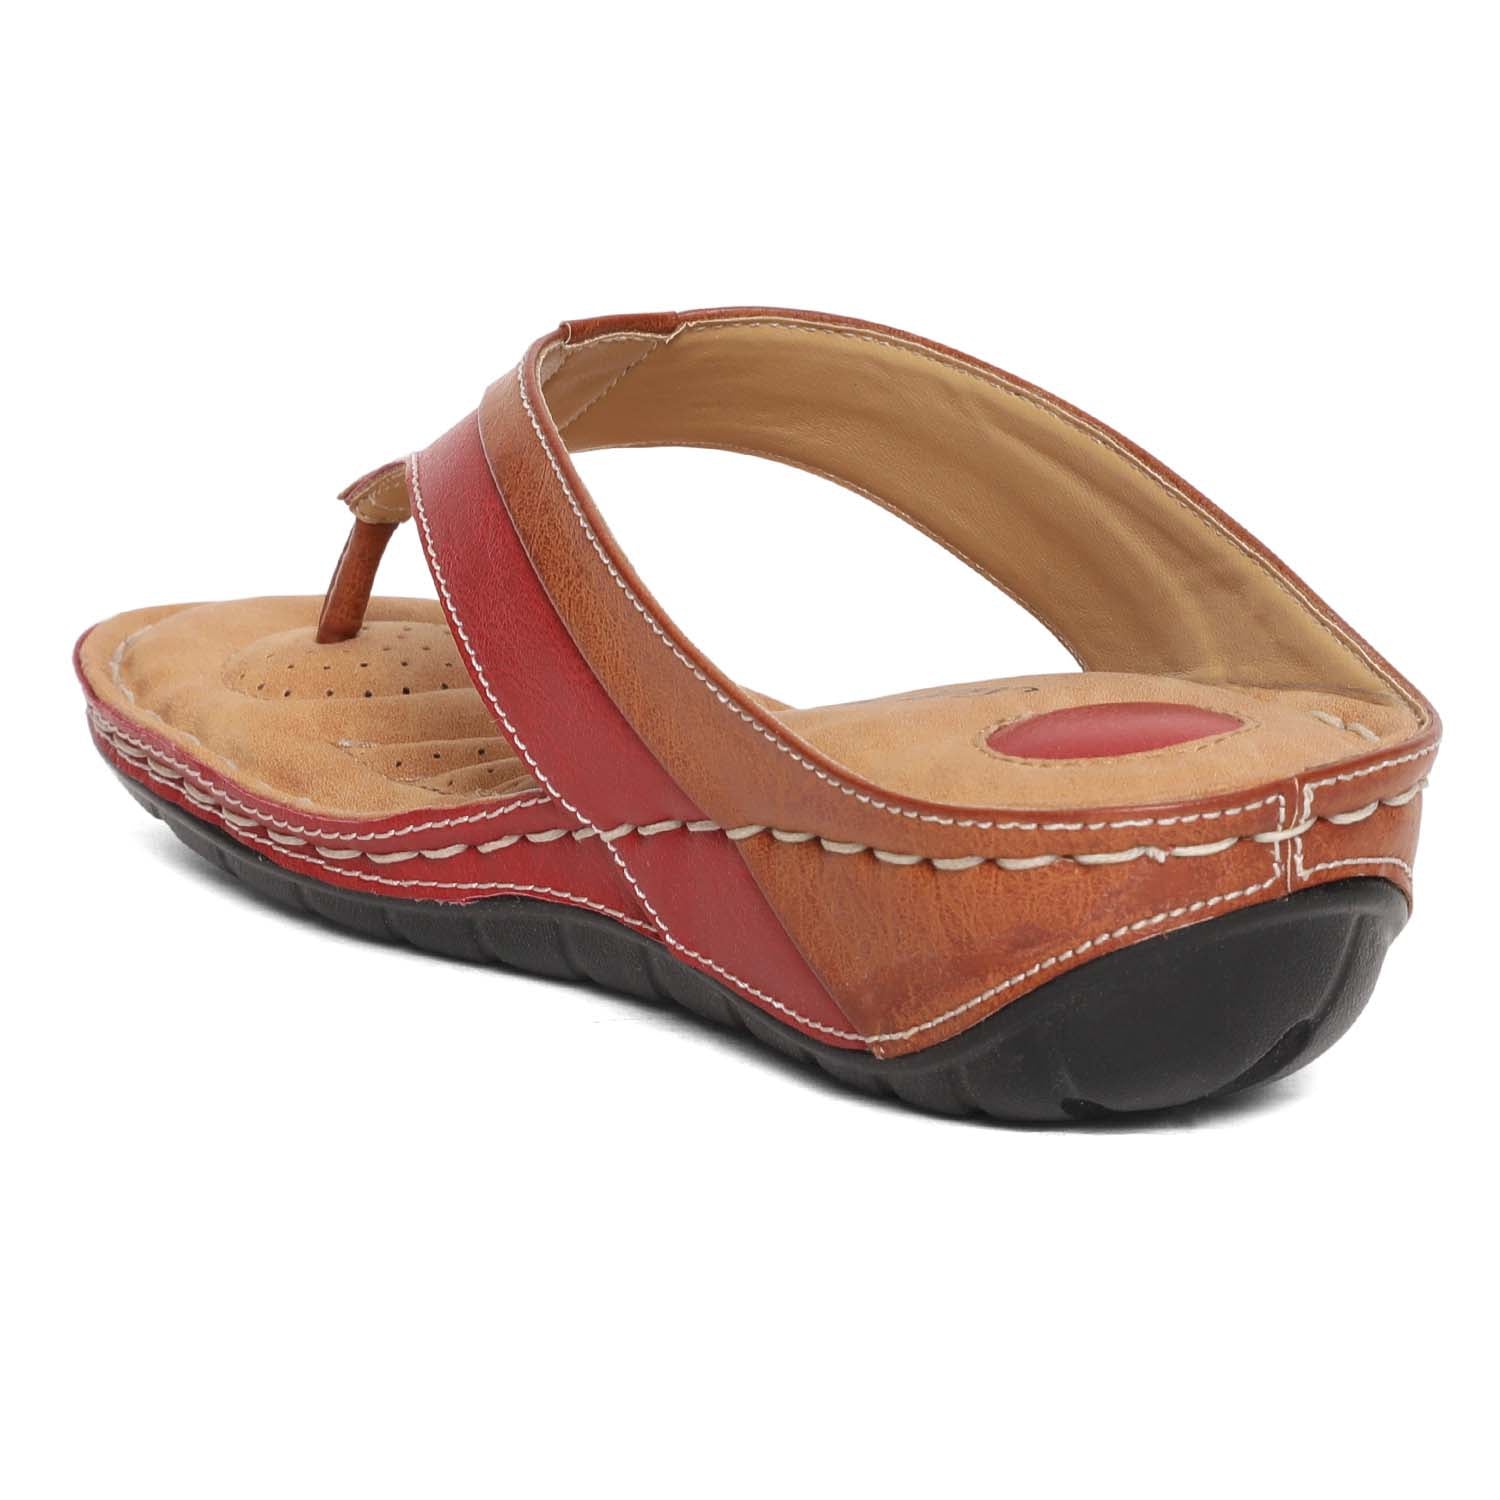 Paragon  R10516L Women Sandals | Casual &amp; Formal Sandals | Stylish, Comfortable &amp; Durable | For Daily &amp; Occasion Wear